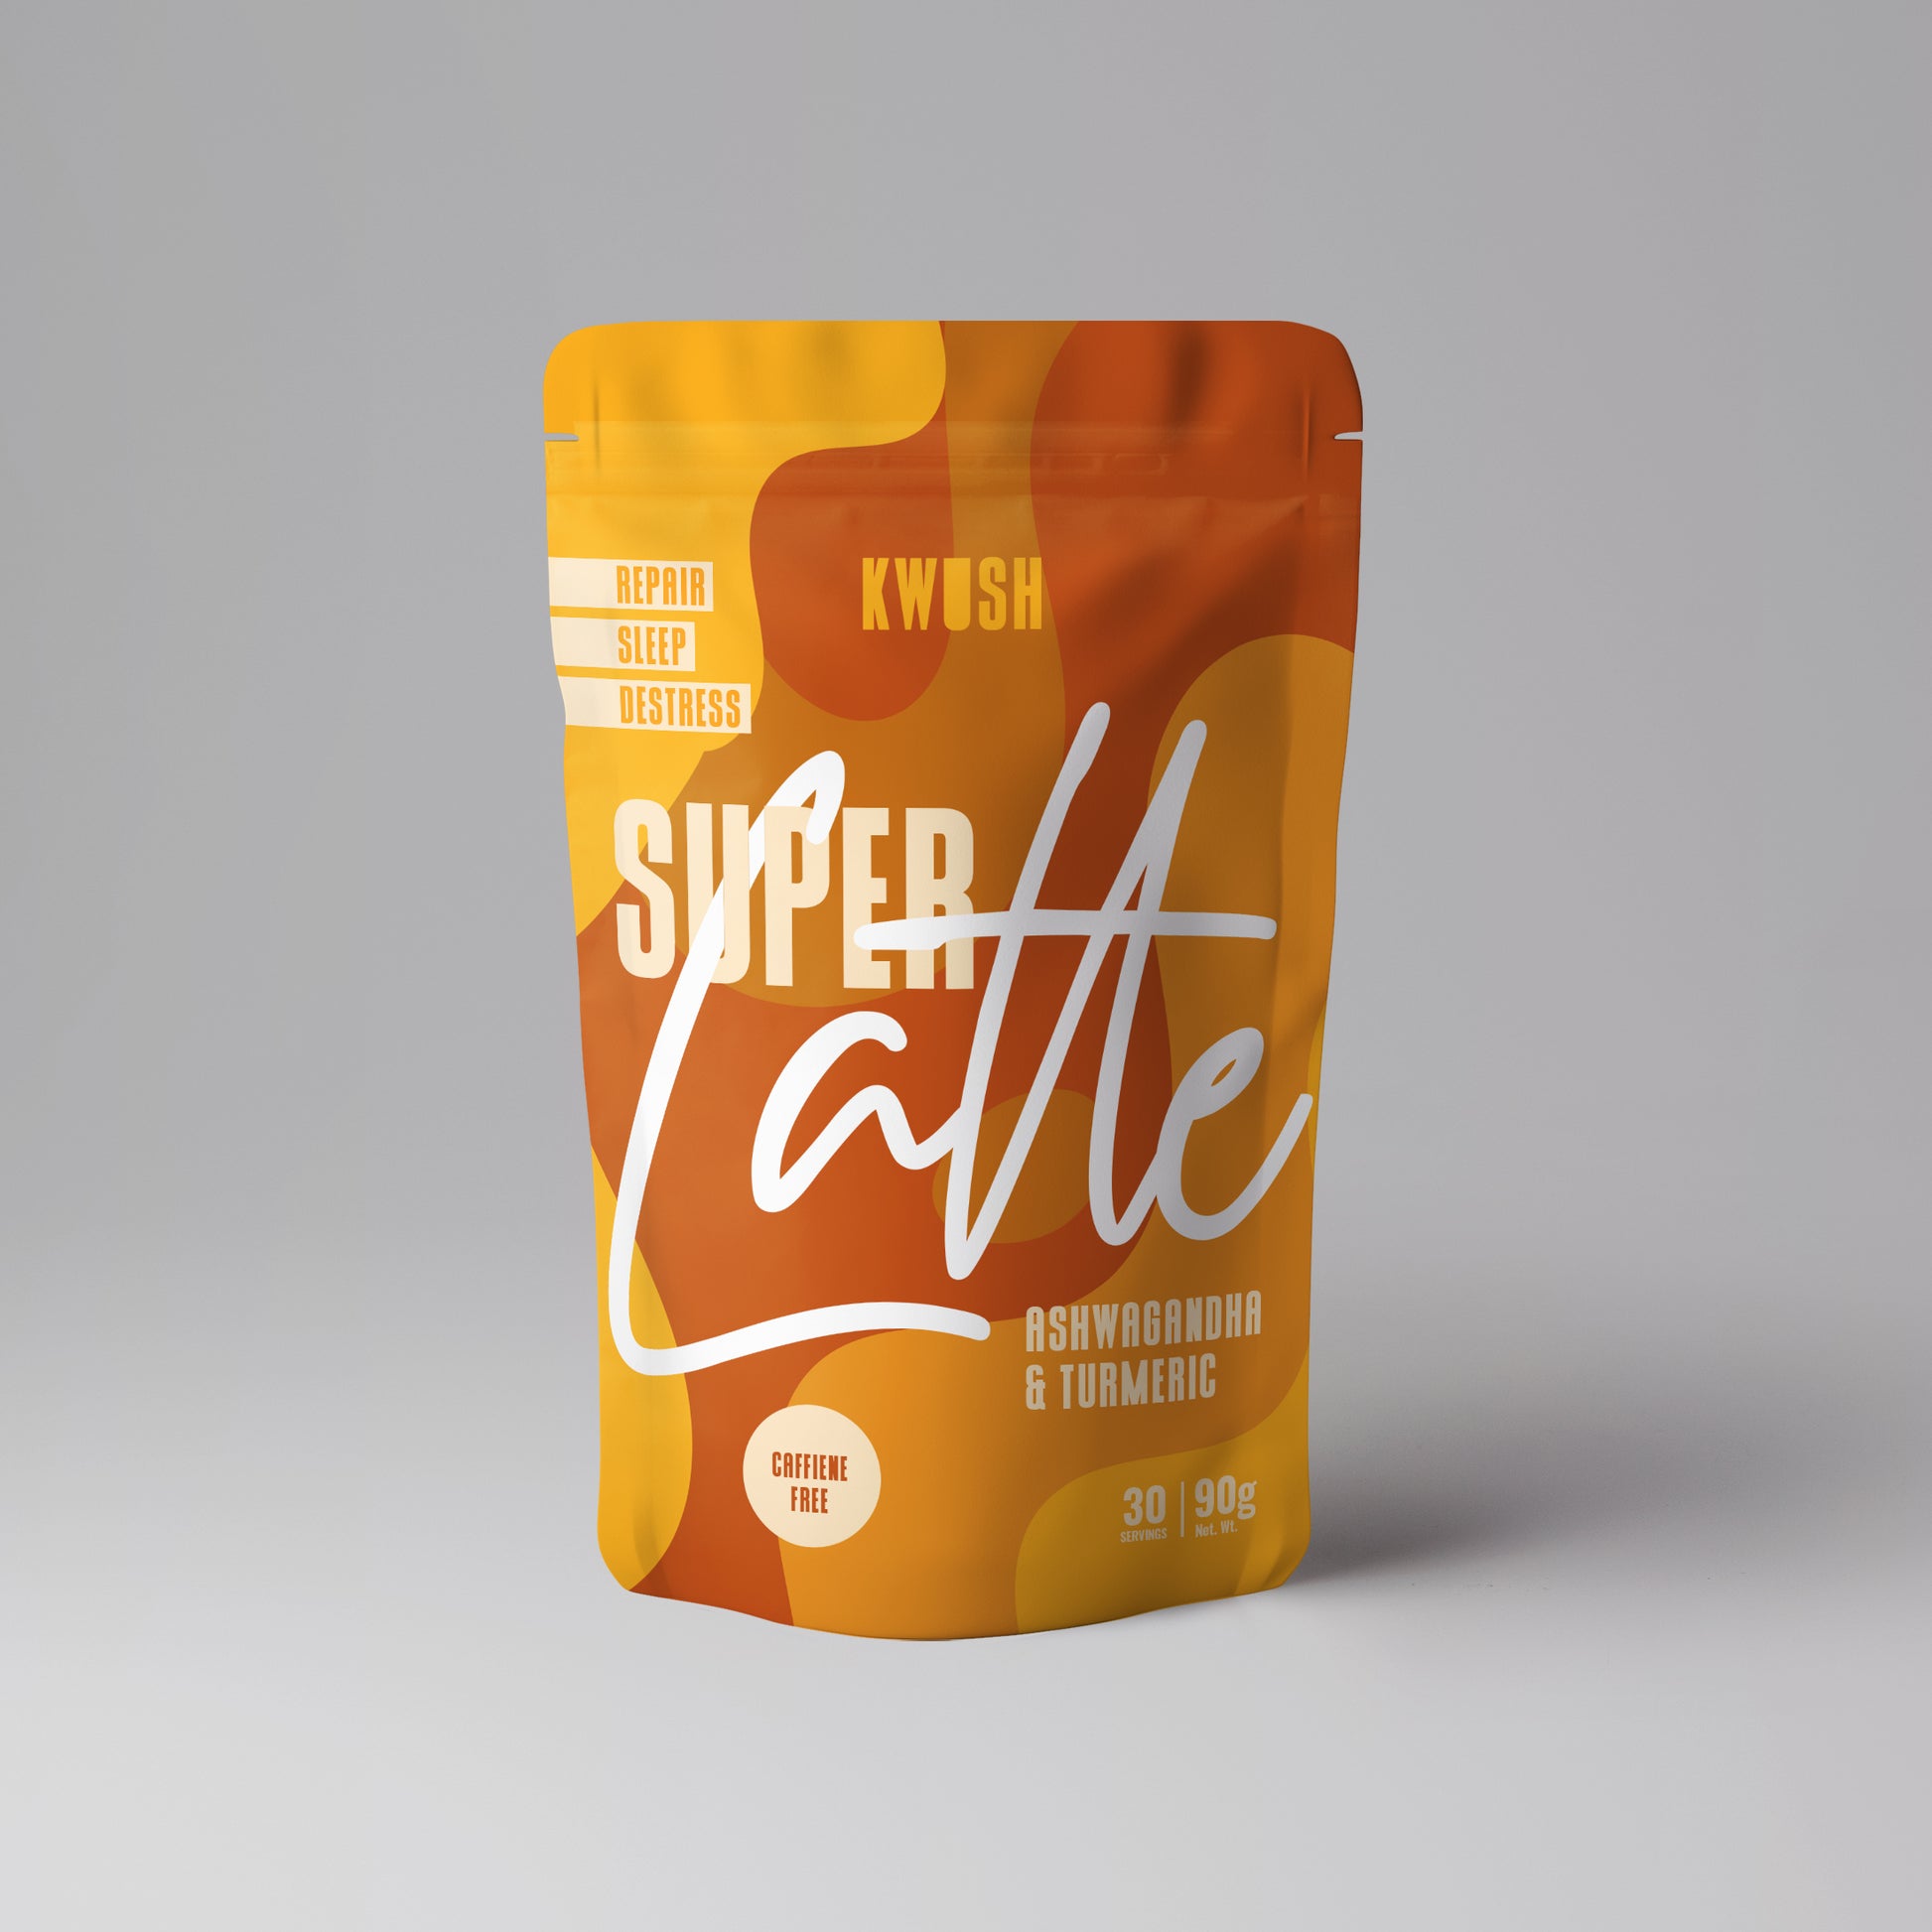 Packet of Kwush Super Latte Golden Powder containing Ashwagandha and turmeric as well as other health beneficial ingredients. It is a coffee alternative that is caffeine free